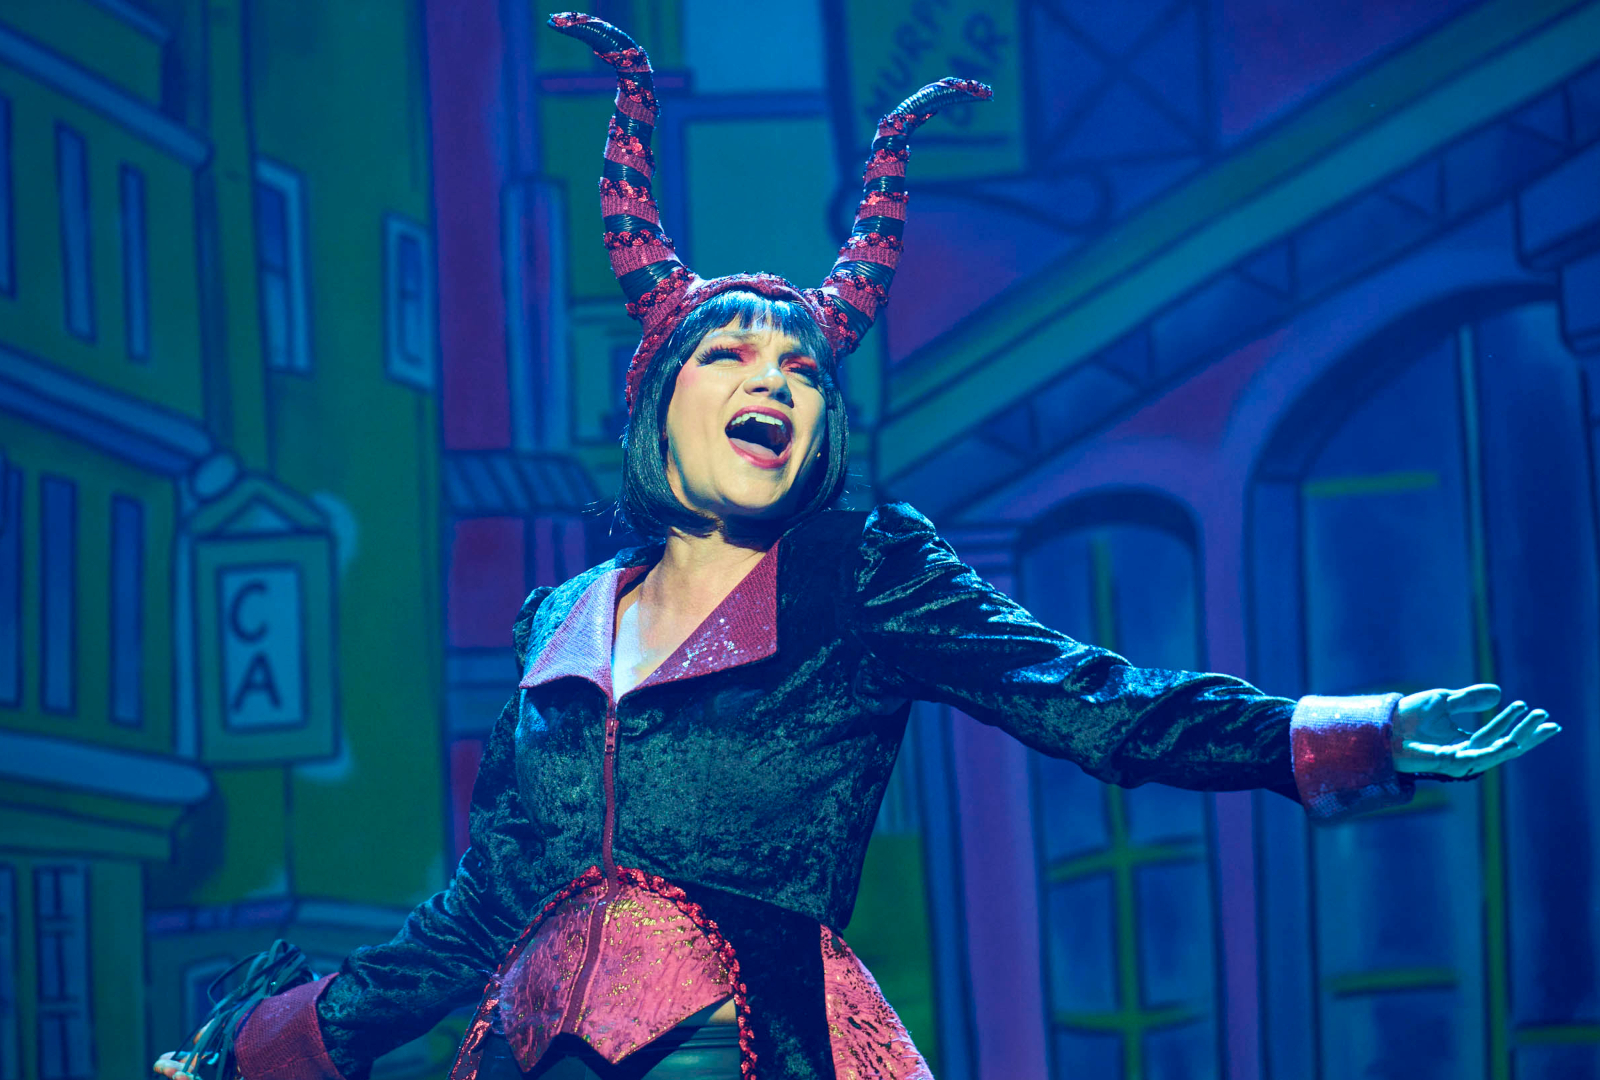 Pippa singing onstage in Maleficent costume